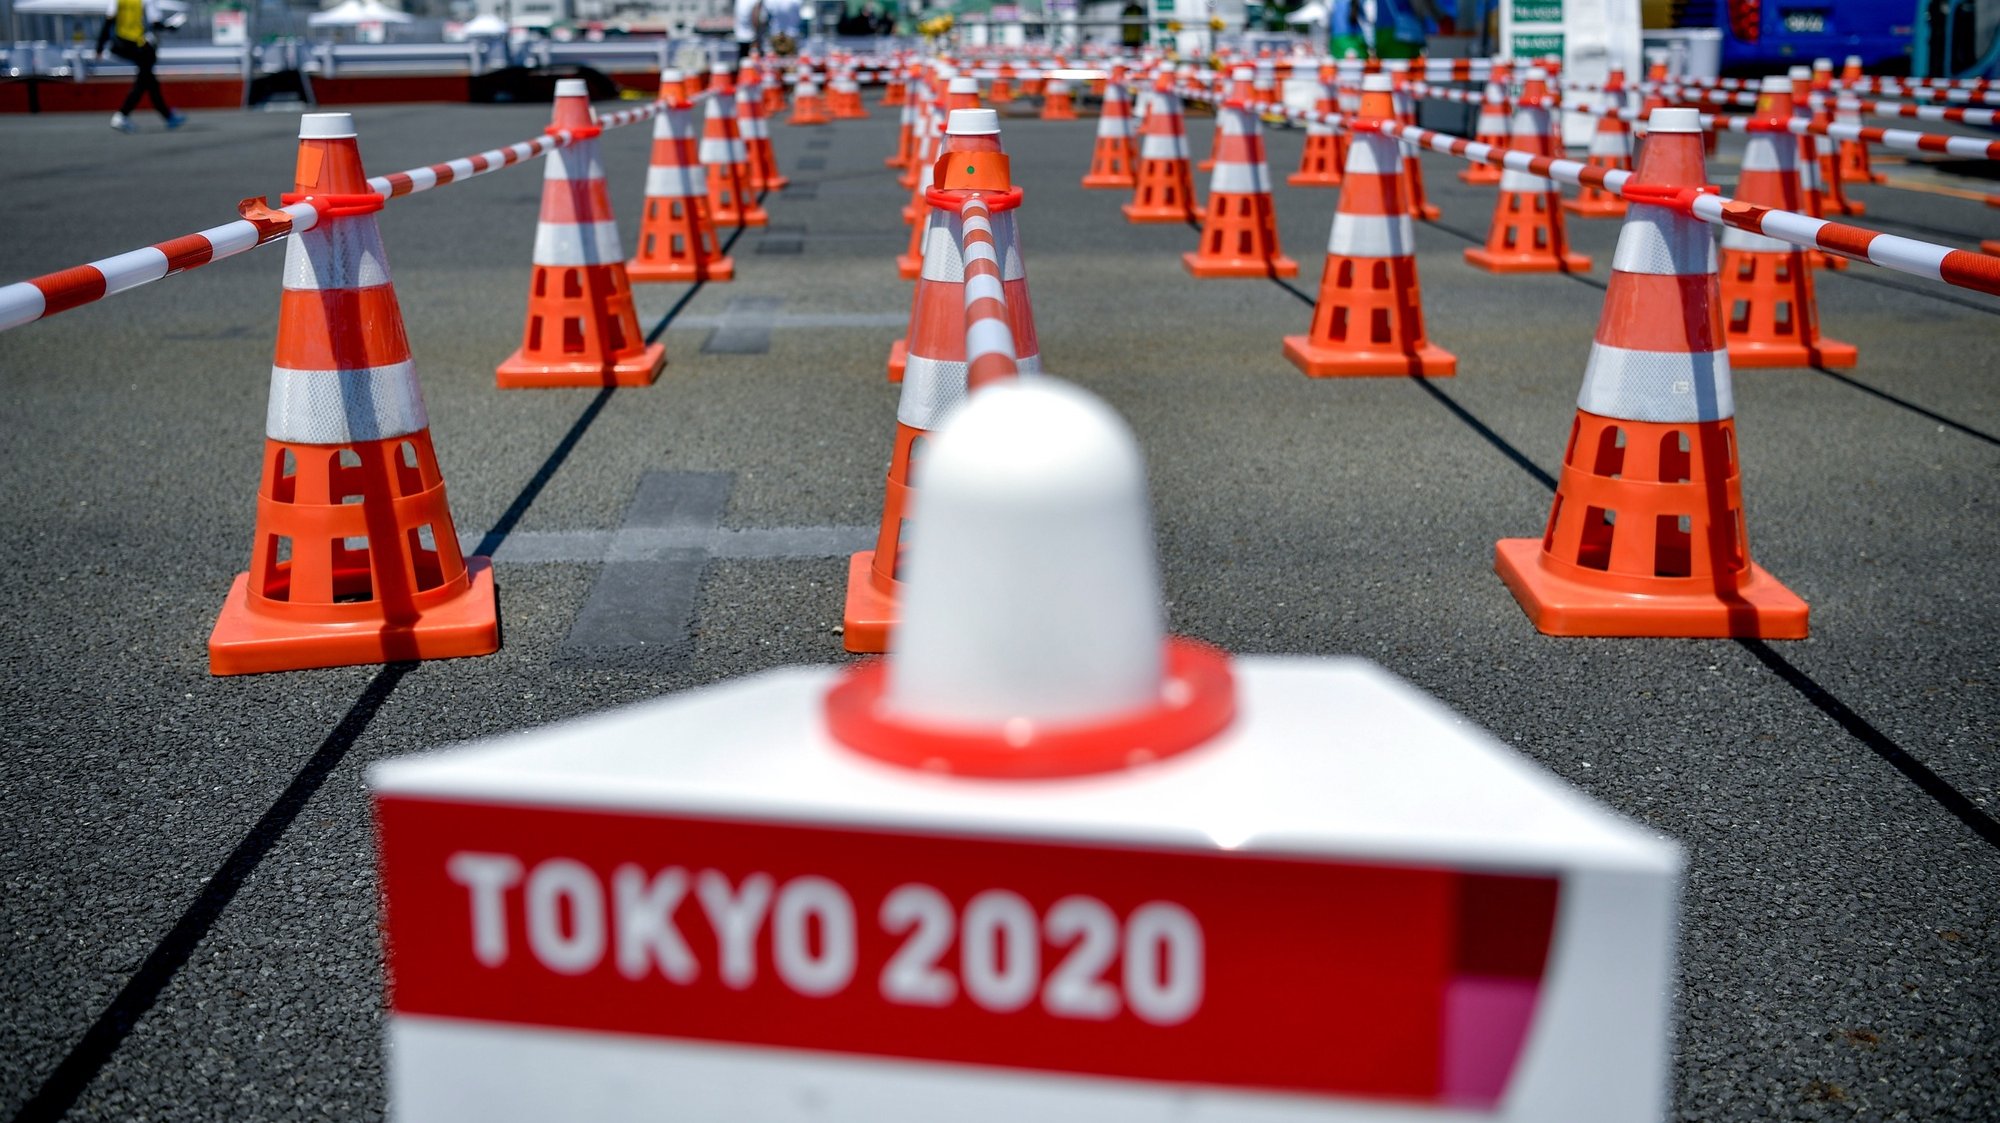 epa09356044 A view of the Olympic bus station in Tokyo, Japan, 21 July 2021. The pandemic-delayed 2020 Summer Olympics are schedule to open on July 23 with spectators banned from most Olympic events due to COVID-19 surge.  EPA/Zsolt Czegledi HUNGARY OUT